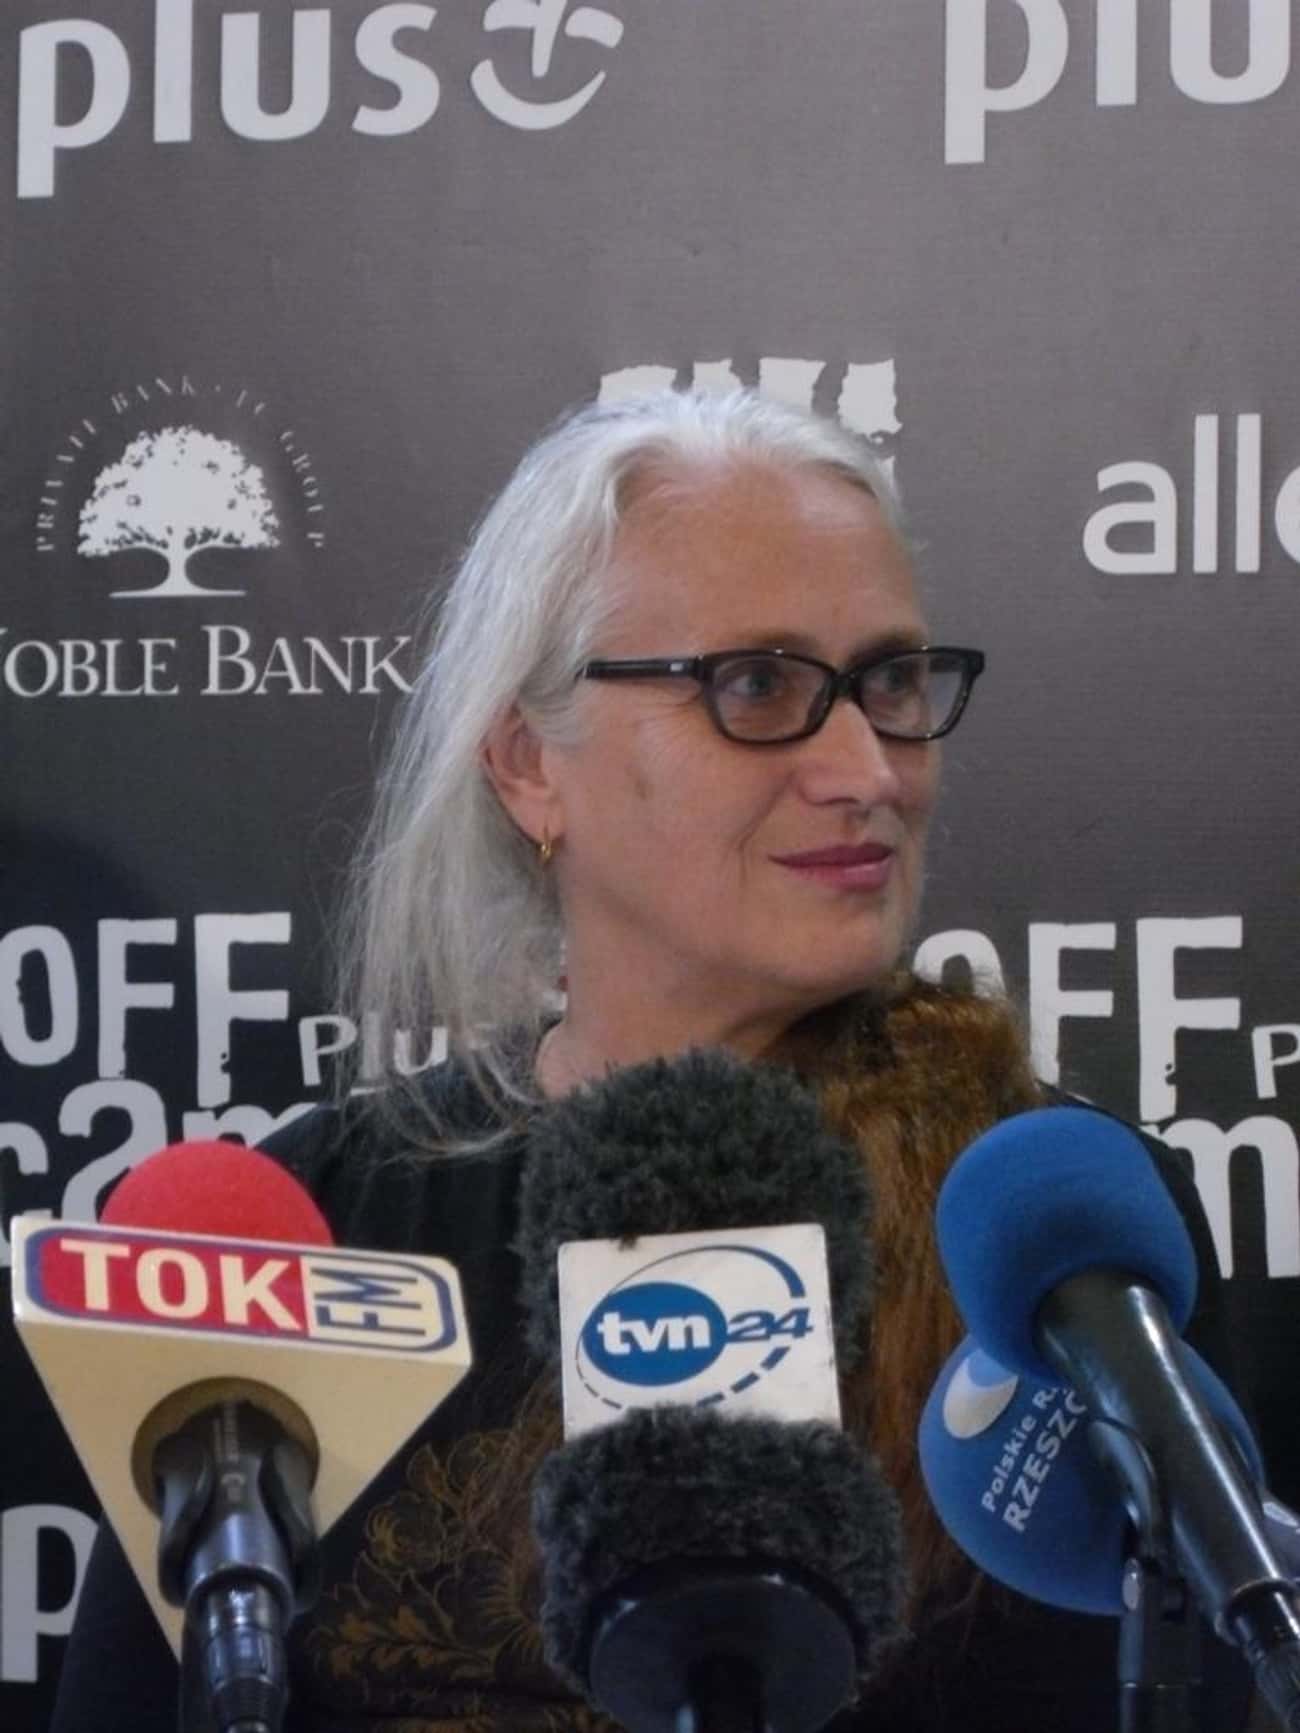 Jane Campion for "The Power of the Dog"